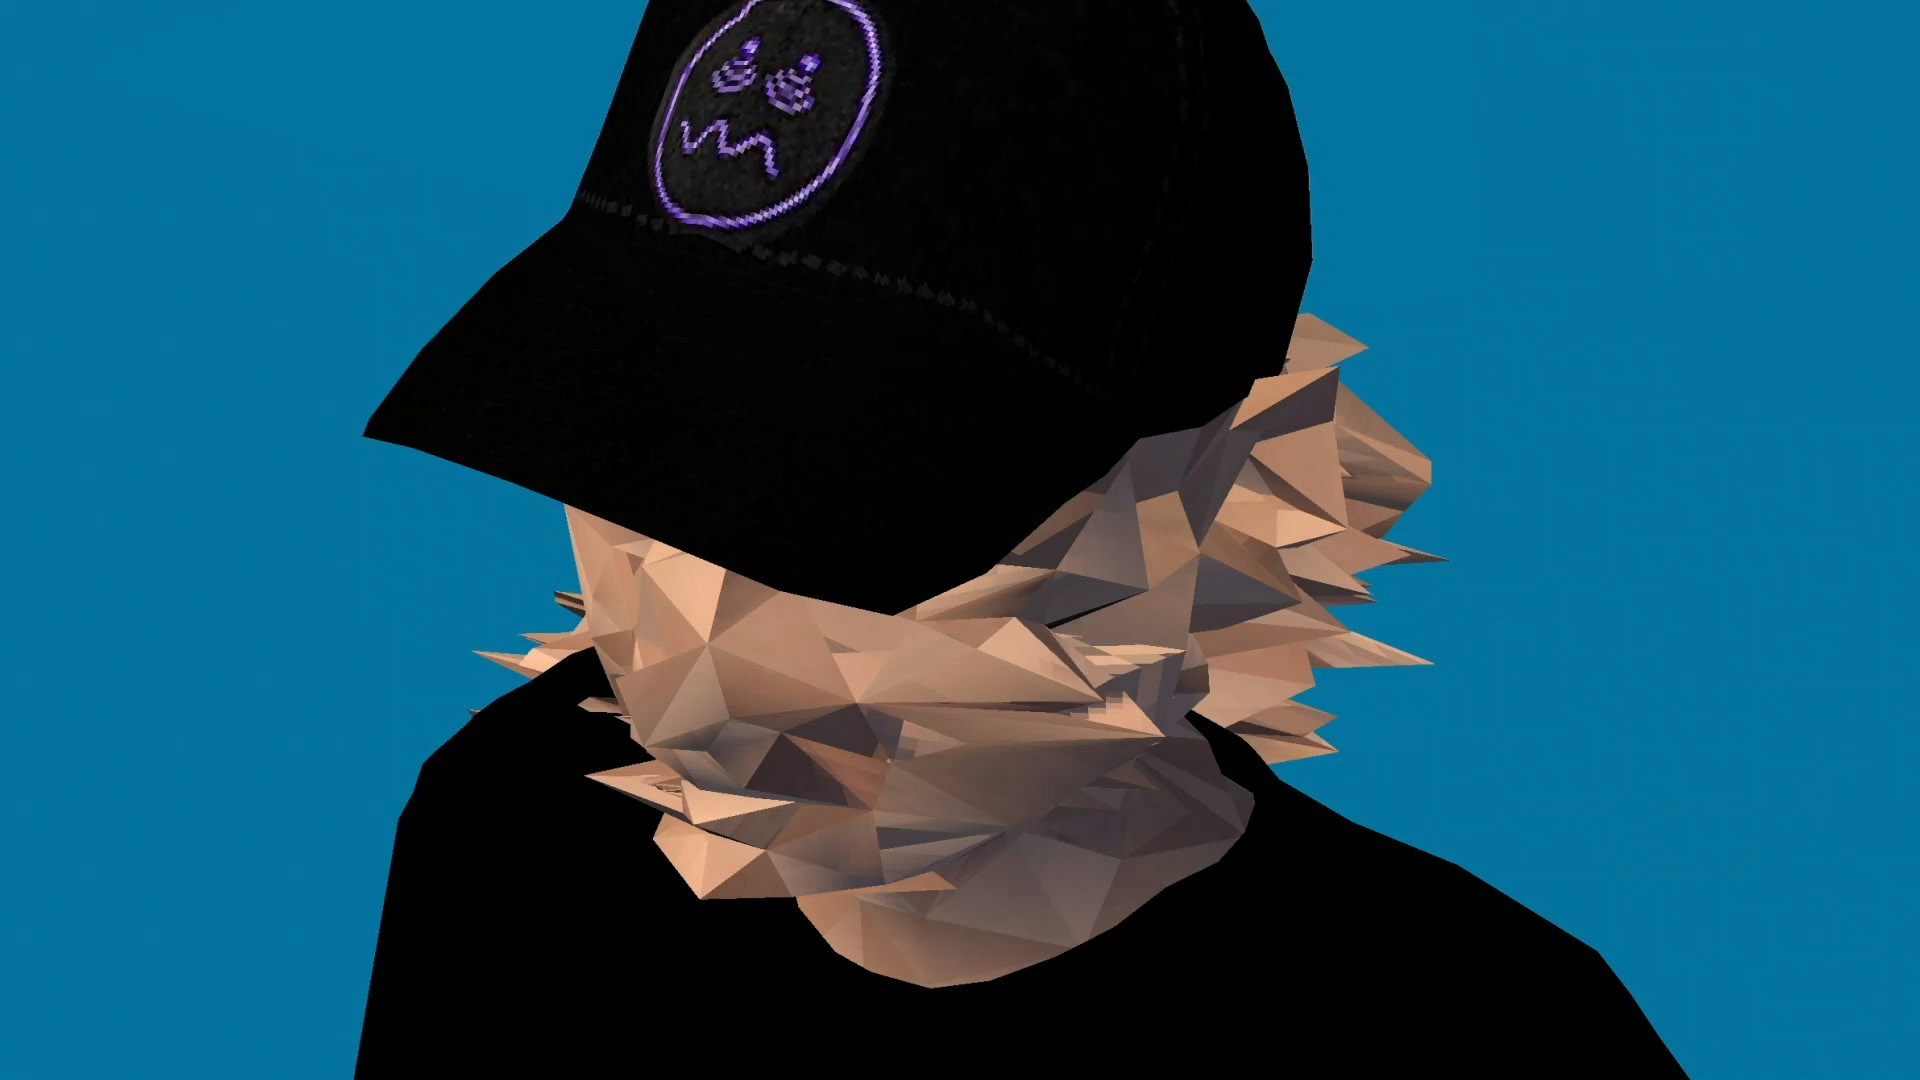 A 3D-character wearing a weekday cap with a blue background. The face of the 3D-character is glitching out with visible polygons